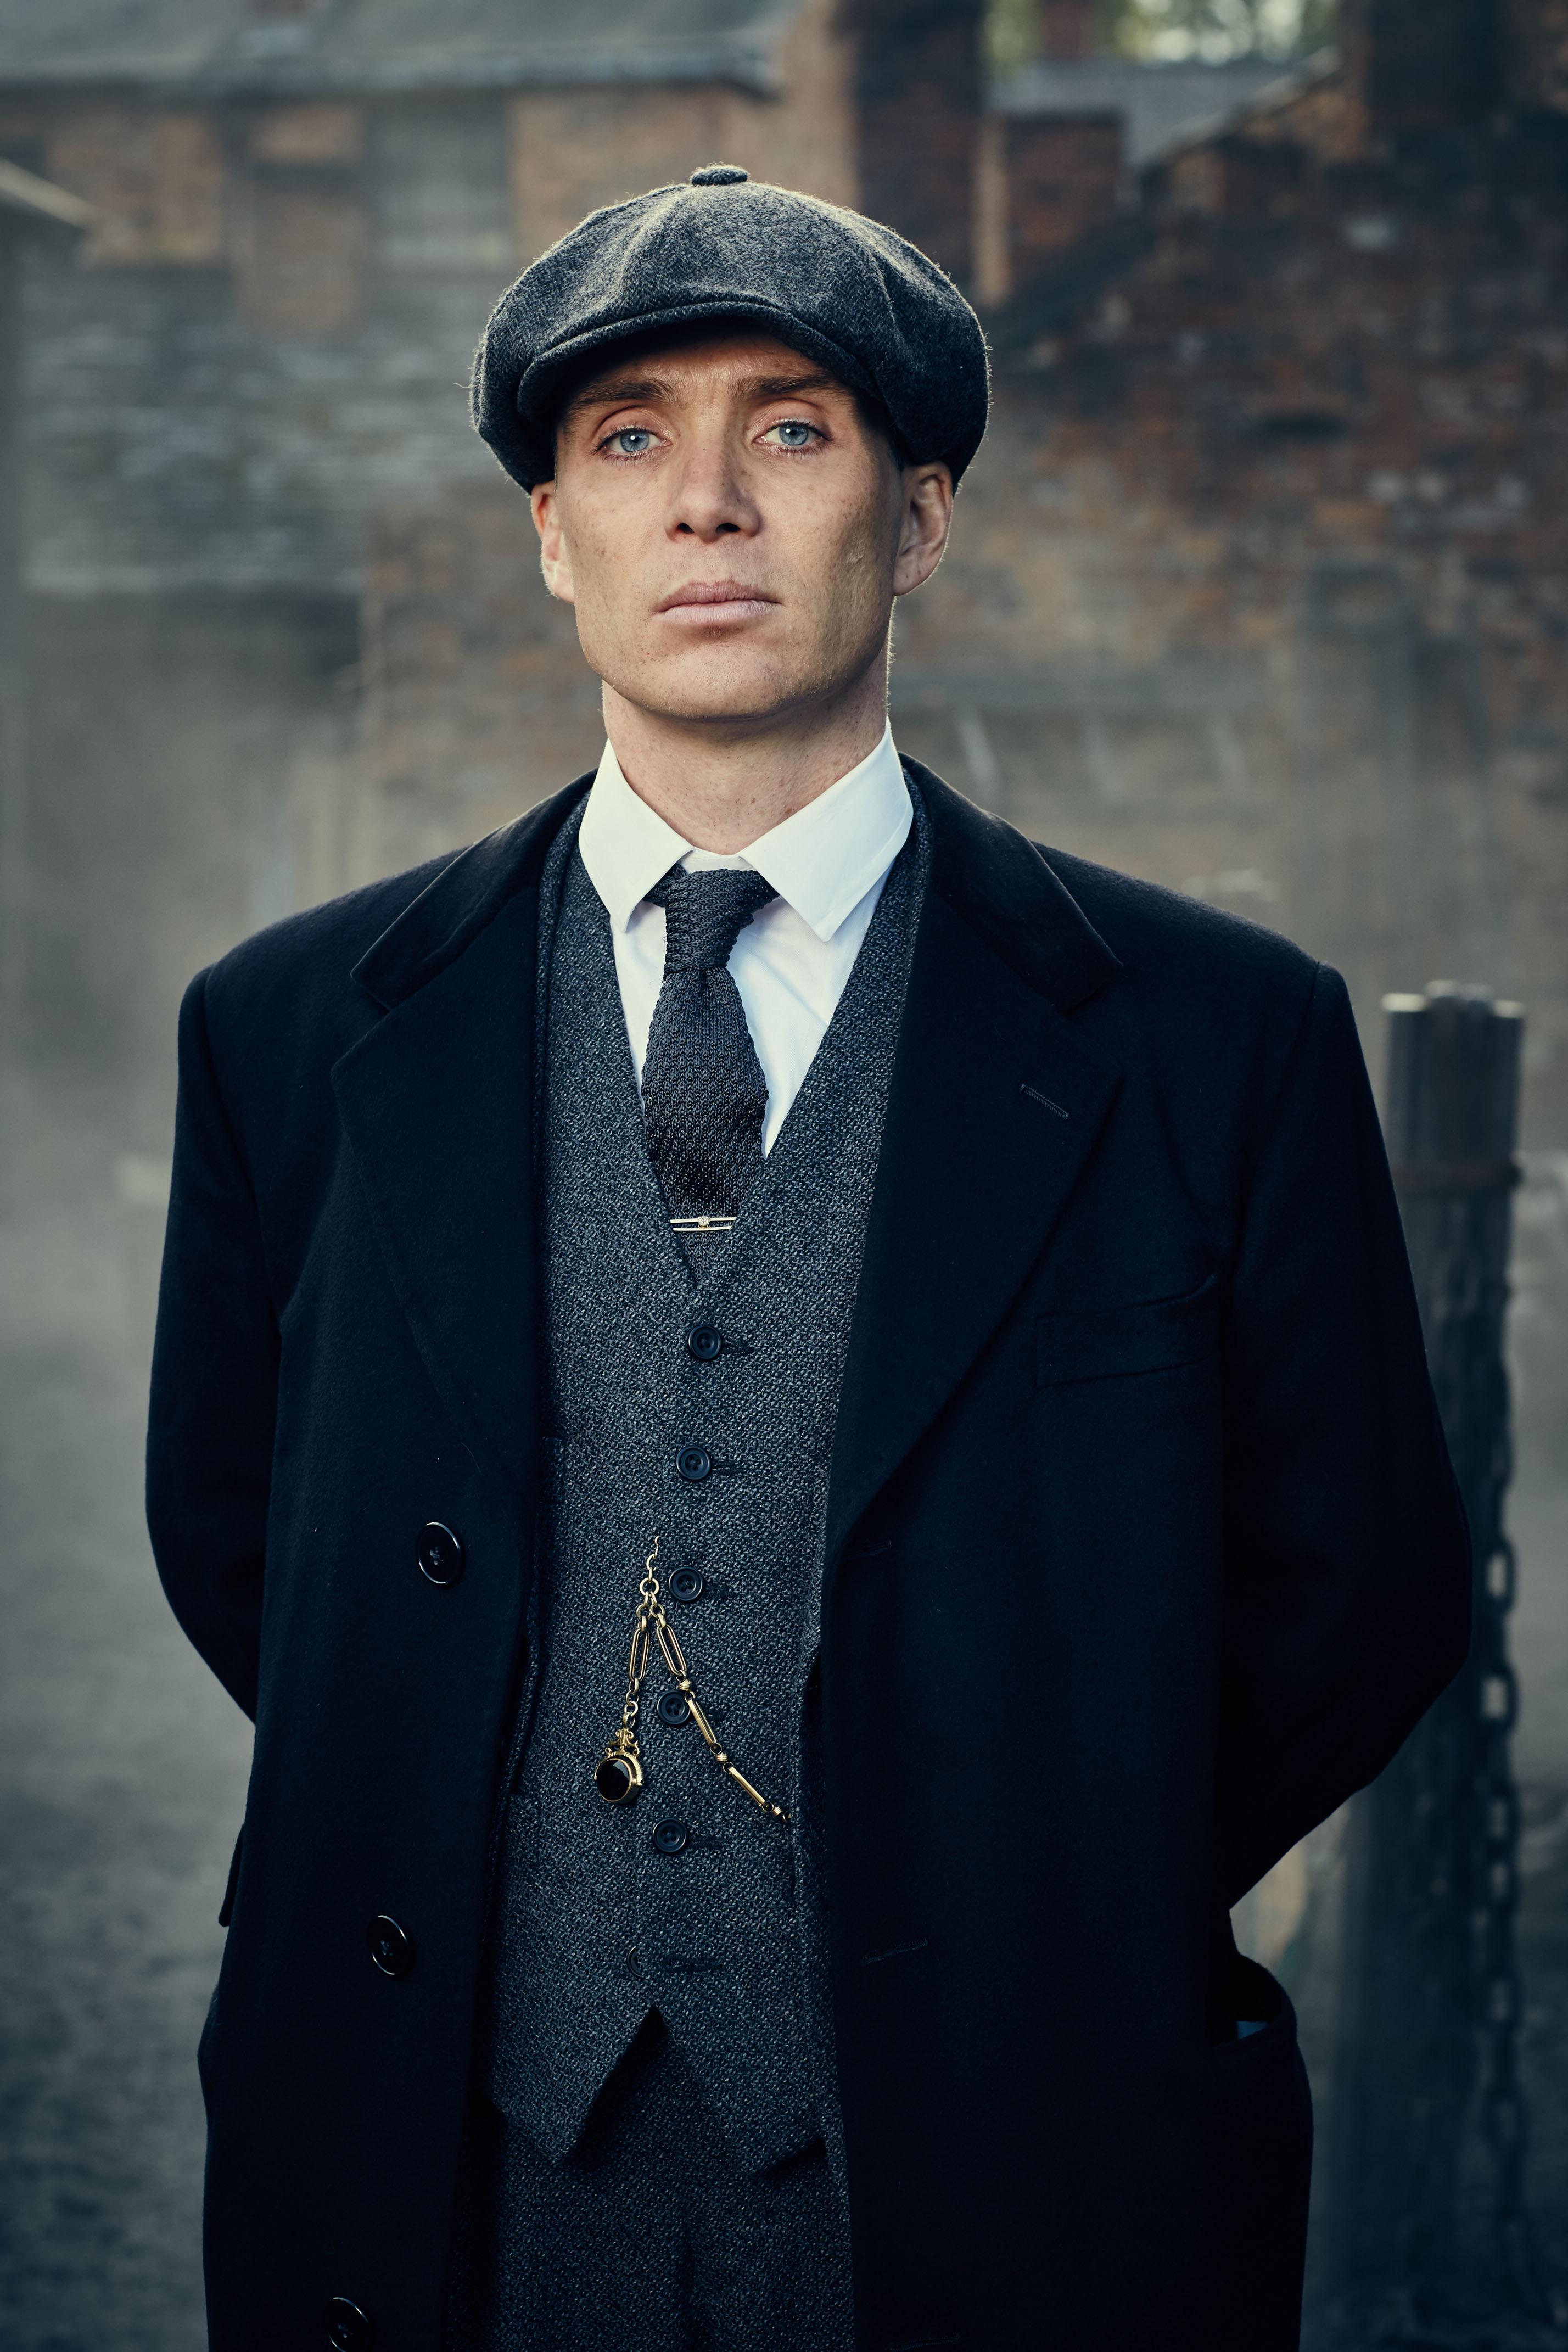 A tommy shelby wallpaper for all you fookin bastards